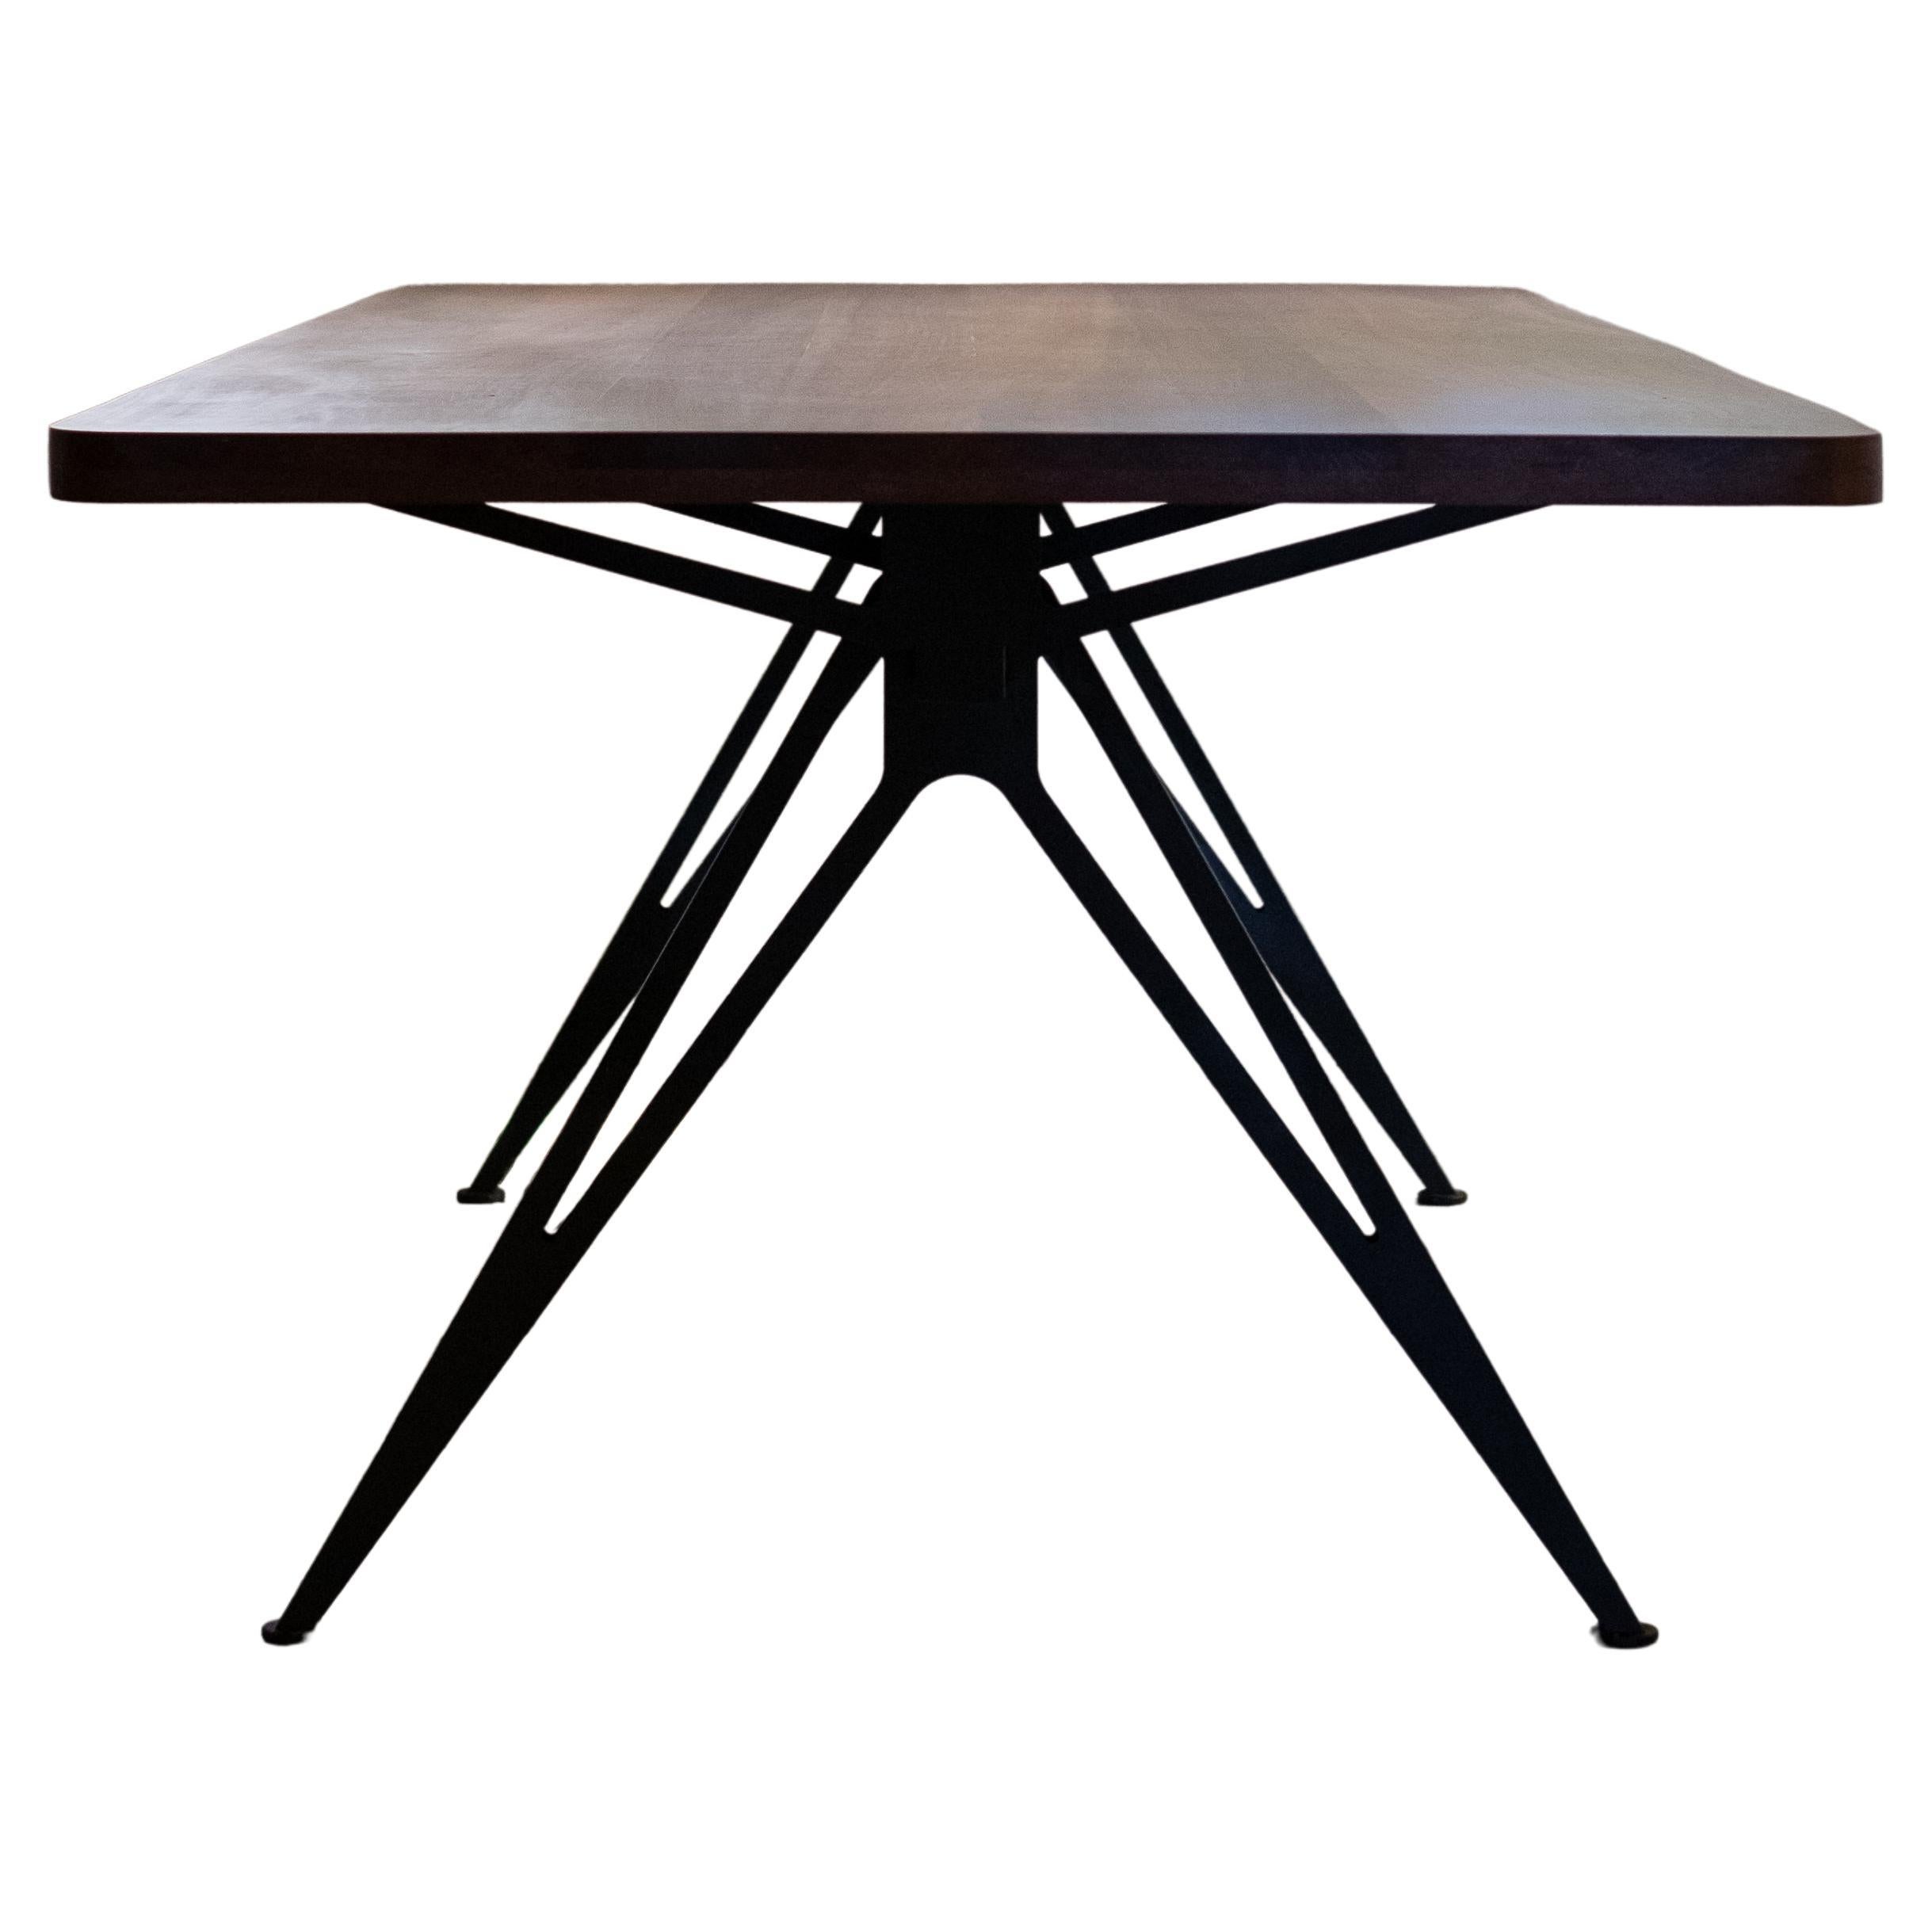 Spine Table with wooden top and black steel base by Manna Design Studio